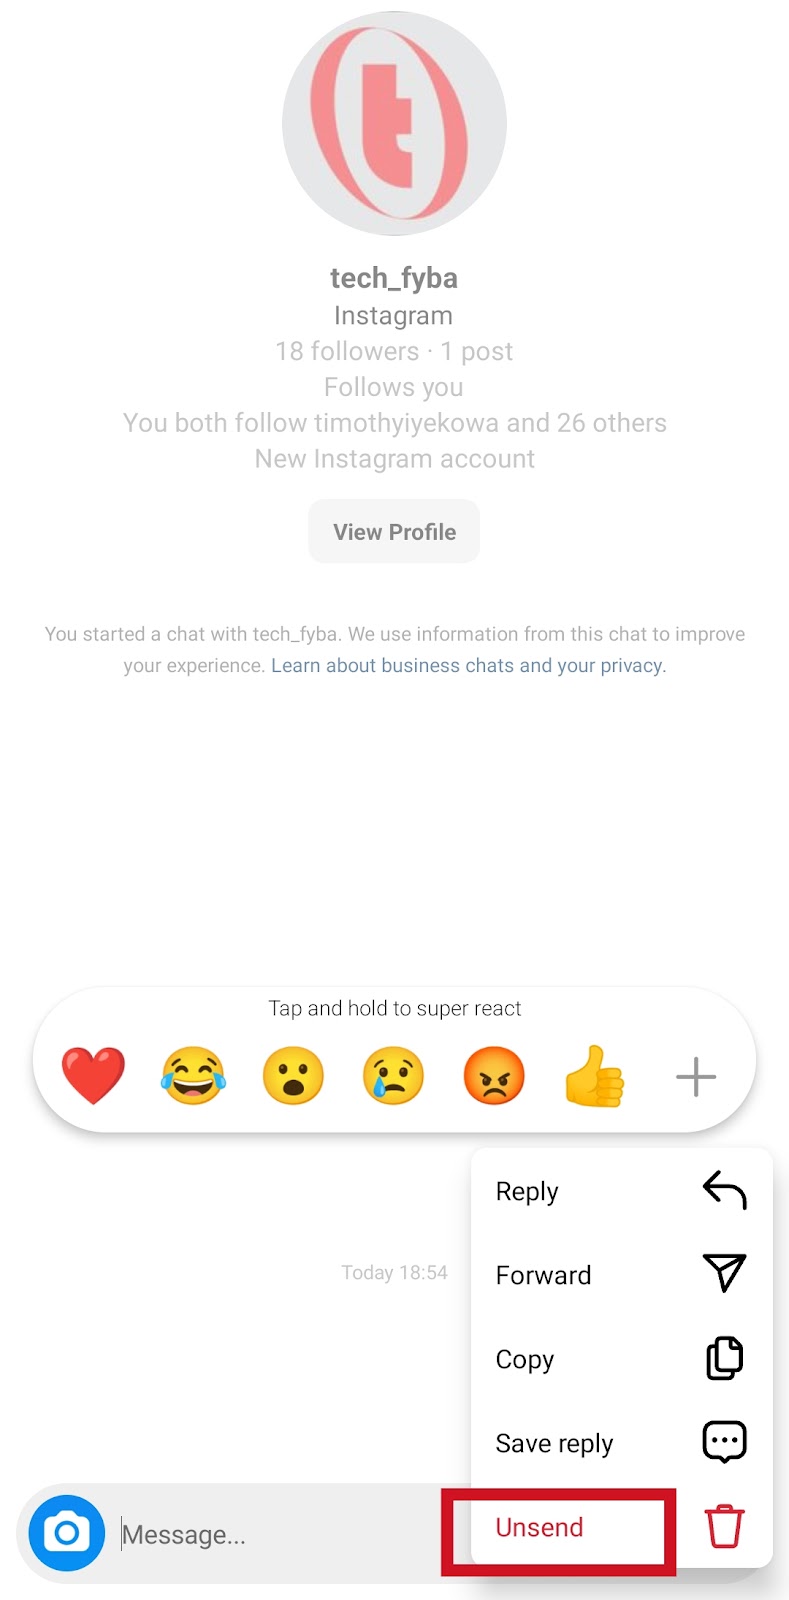 How To Unsend A Message On Instagram